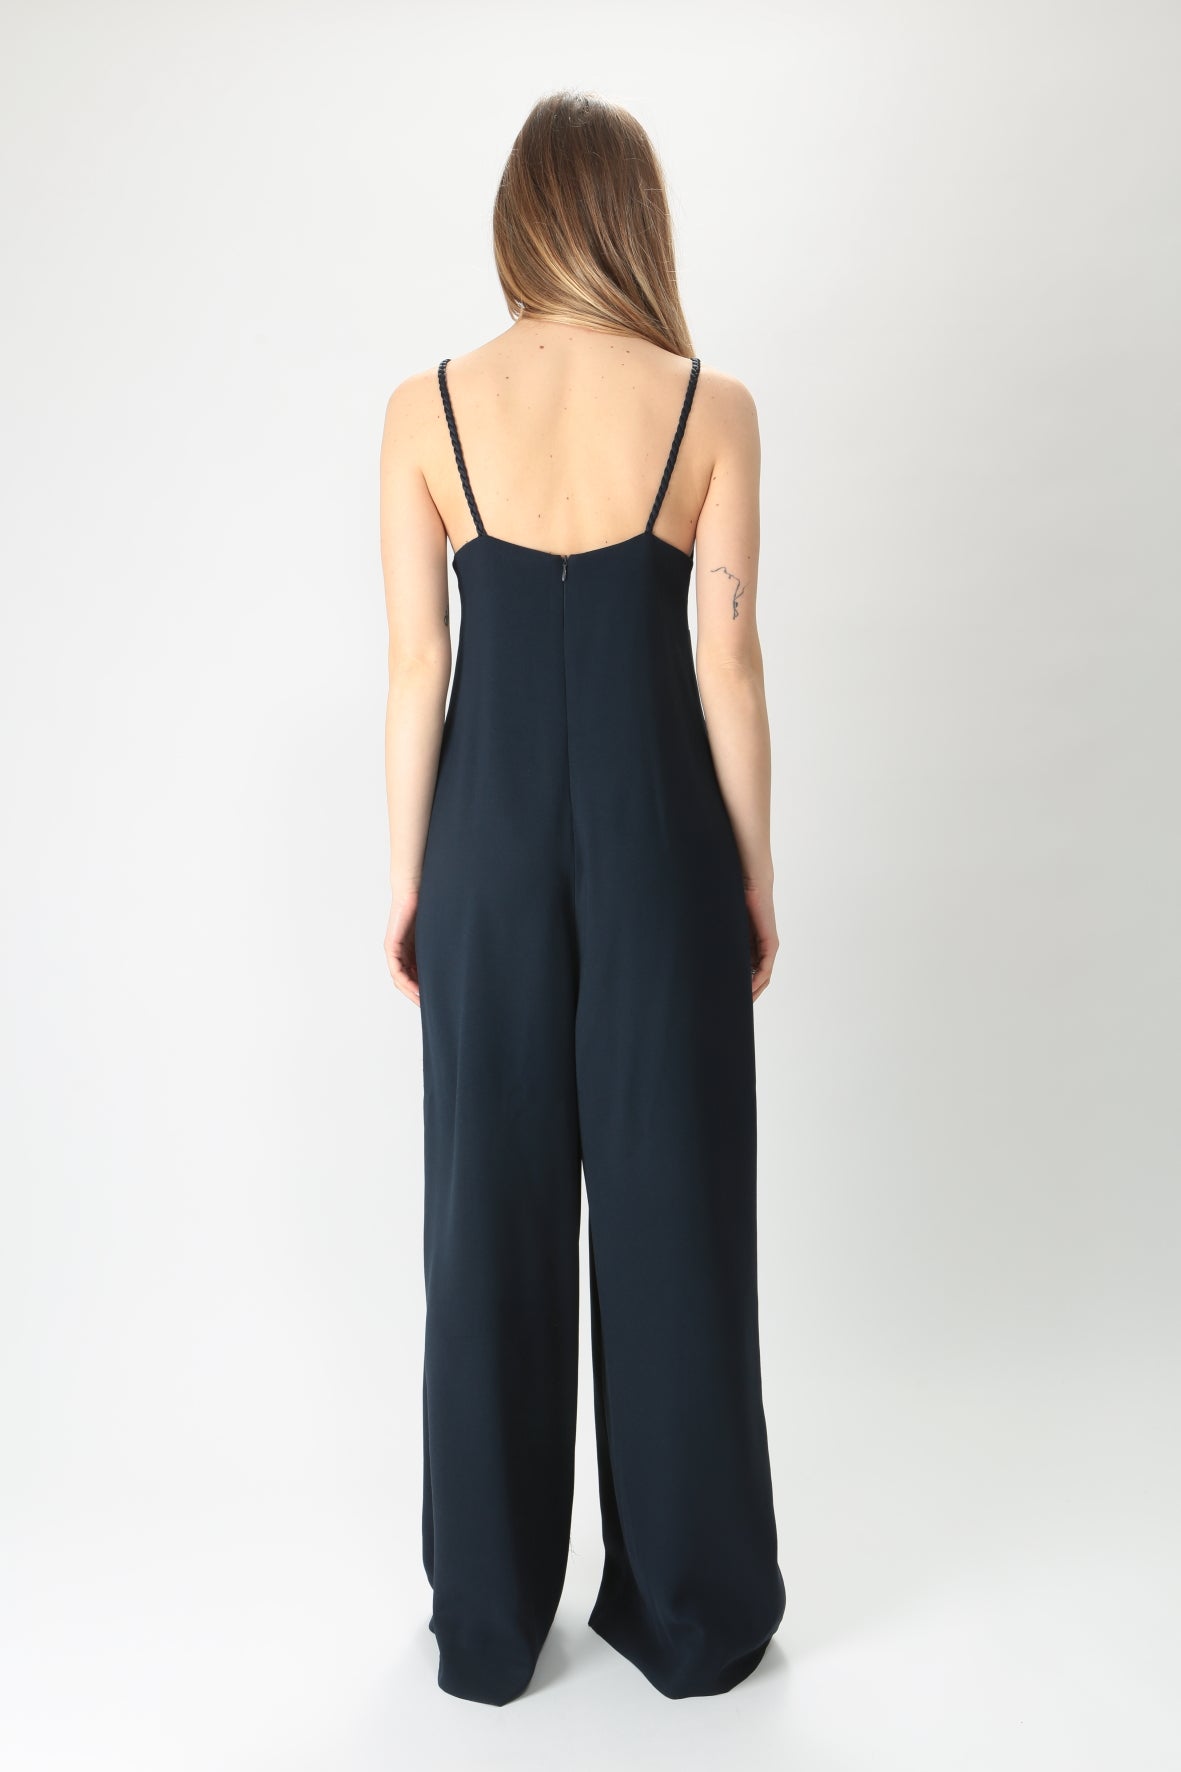 https://admin.shopify.com/store/gulieshop/products/9114952892765#:~:text=Invia-,Ottod%27ame%20Jumpsuit%20ampia%20DP9600,-Contenuto%20multimediale%201